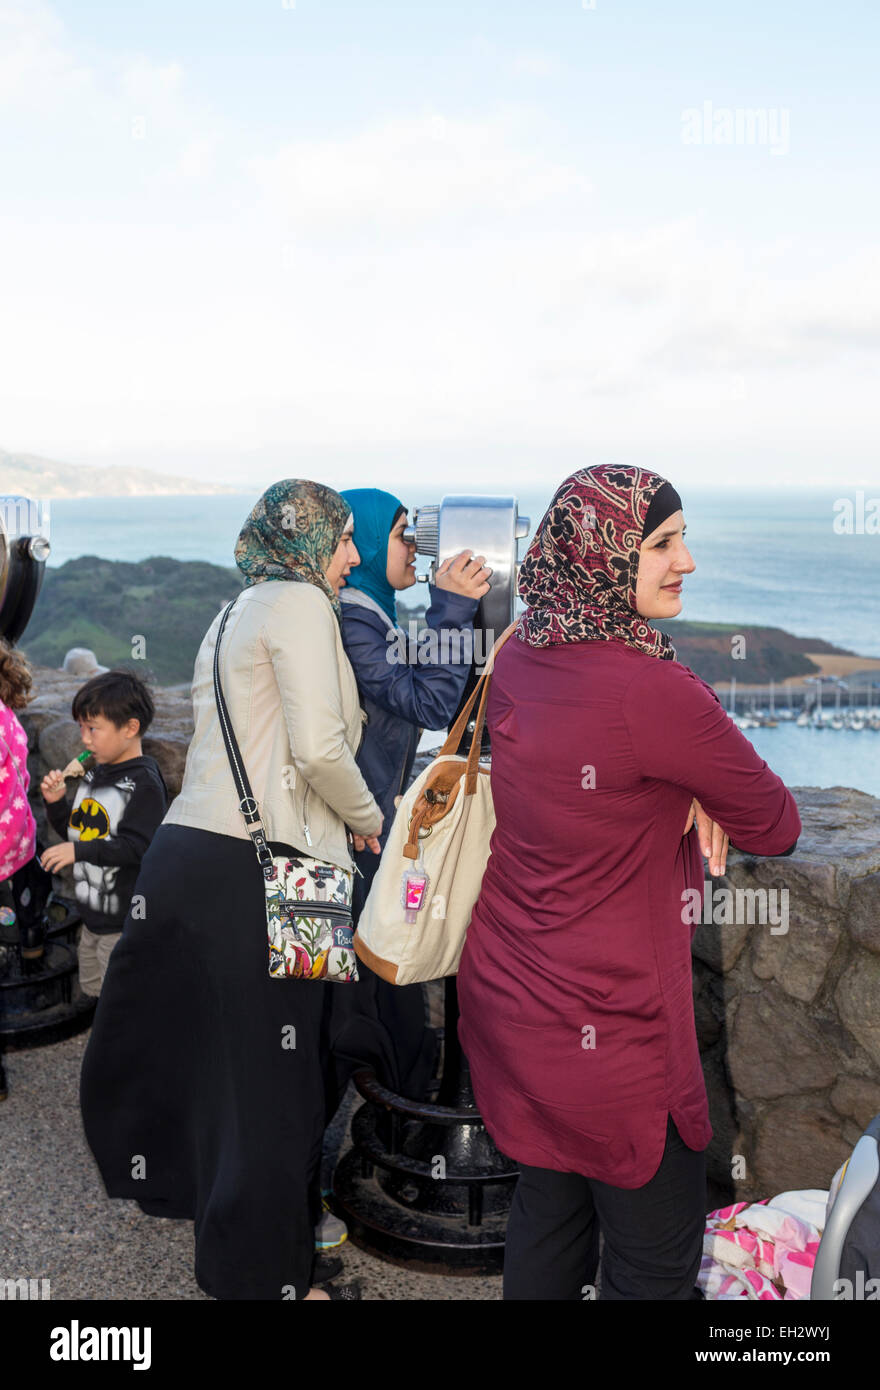 adult women, tourists, visitors, looking through viewfinder, north side of Golden Gate Bridge, Vista Point, city of Sausalito, California Stock Photo